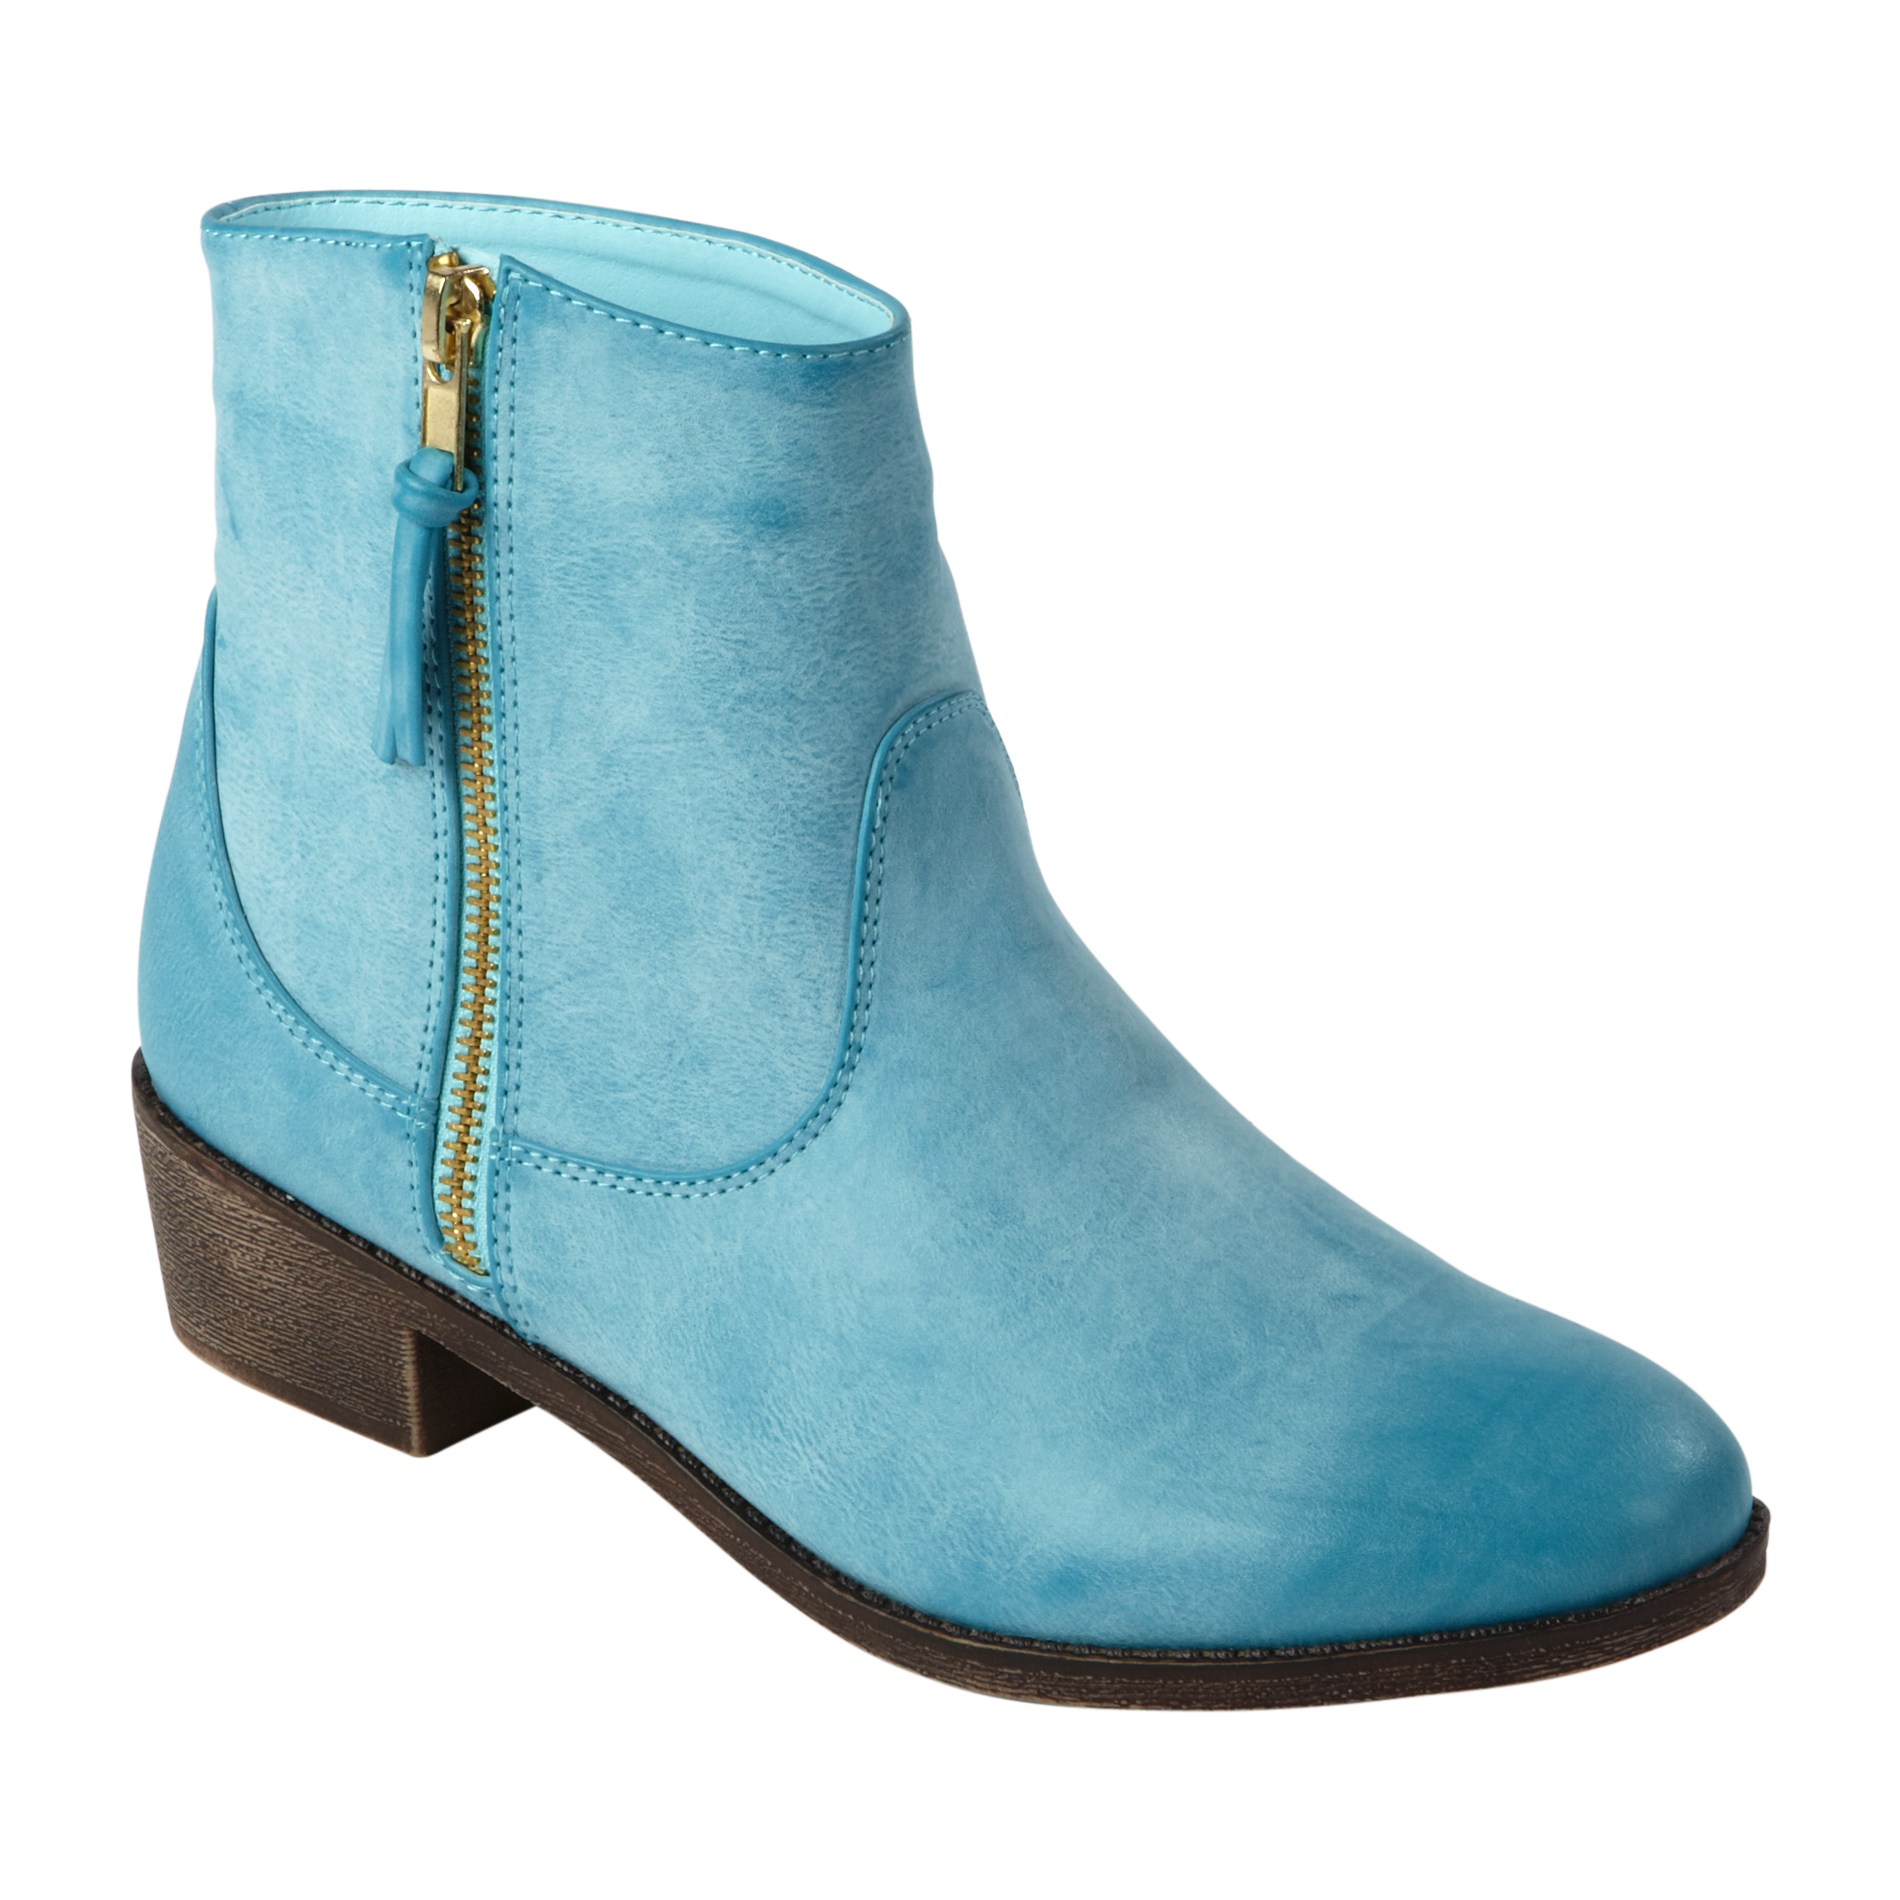 Route 66 Women's Boot Aviator - Turquoise